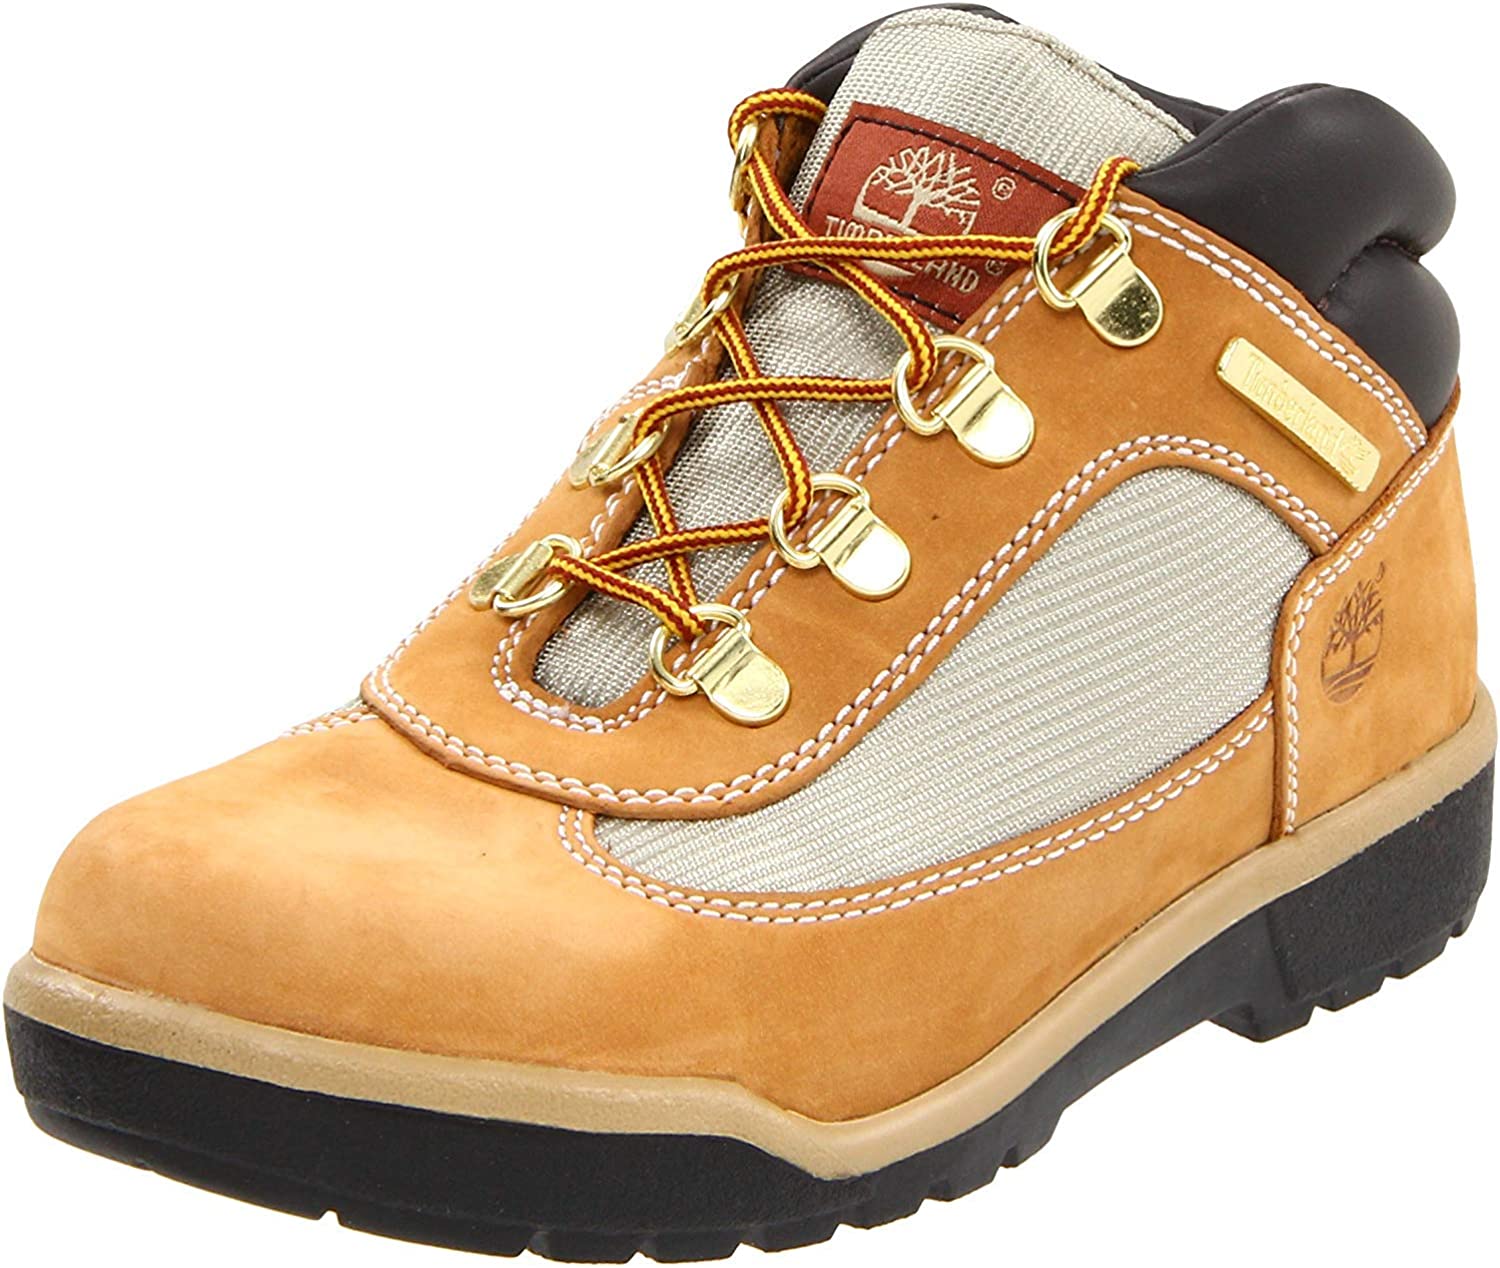 Timberland Leather and Fabric Field Boot (Toddler/Little Kid/Big Kid),Wheat,6 M US Big Kid